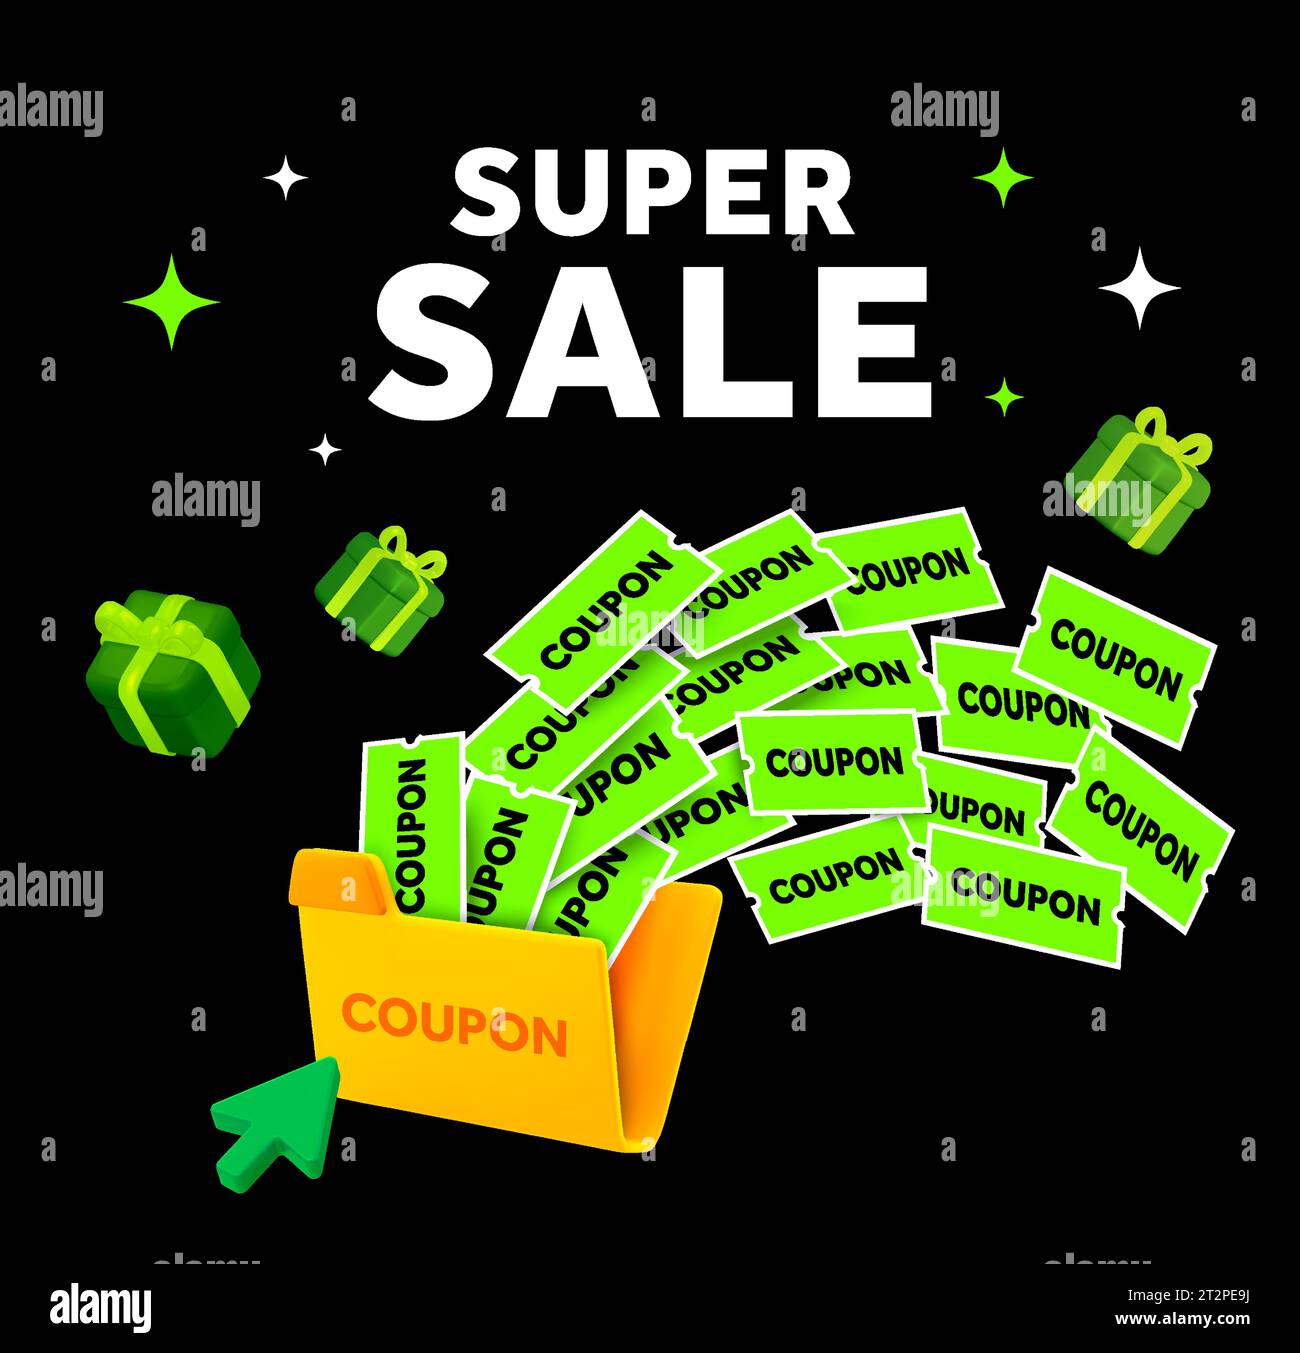 Black friday super sale banner template with many green coupons and gift boxes flying out. Premium price special event gift card. Hot deal offer poster. 2d flat vector illustration. Vector illustration Stock Vector